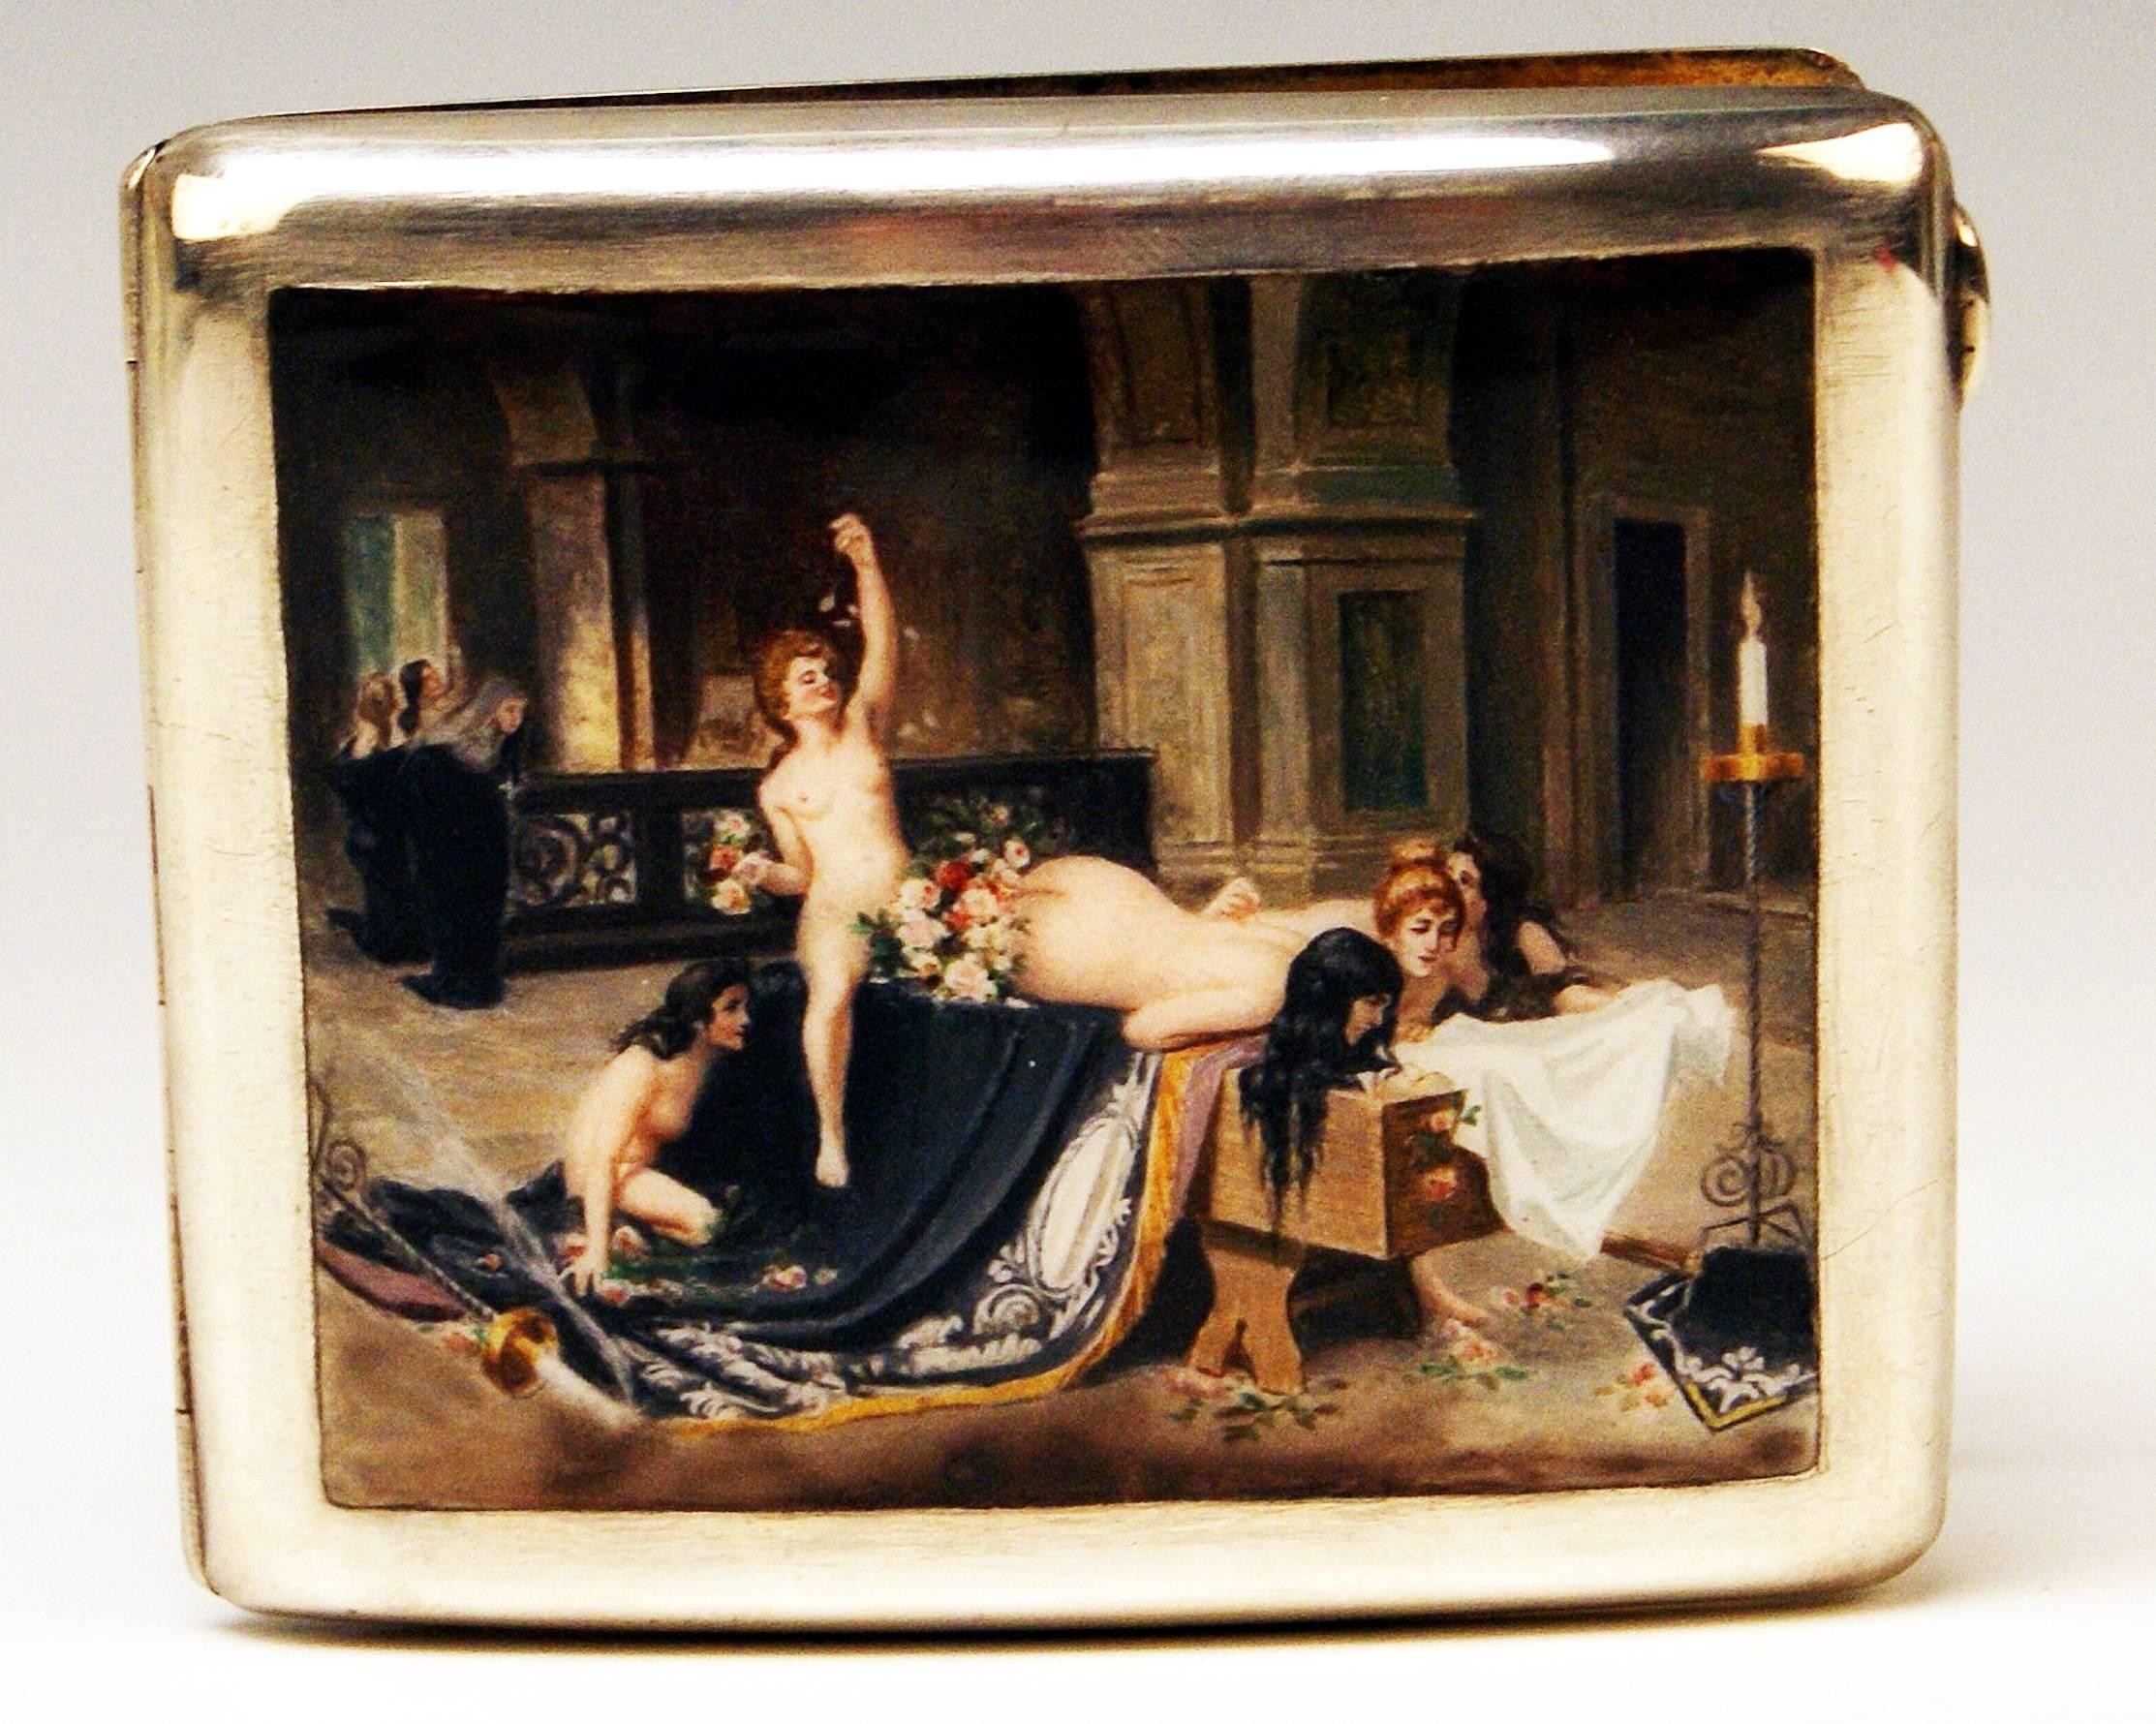 VERY INTERESTING SILVER 800 CIGARETTE BOX / CASE WITH ENAMEL PAINTING COVERING LID:
LADIES IN CHURCH

The lid is decorated with a rare enamel picture - following scene is painted there:
Five lady nudes being situated in a church are watched by three